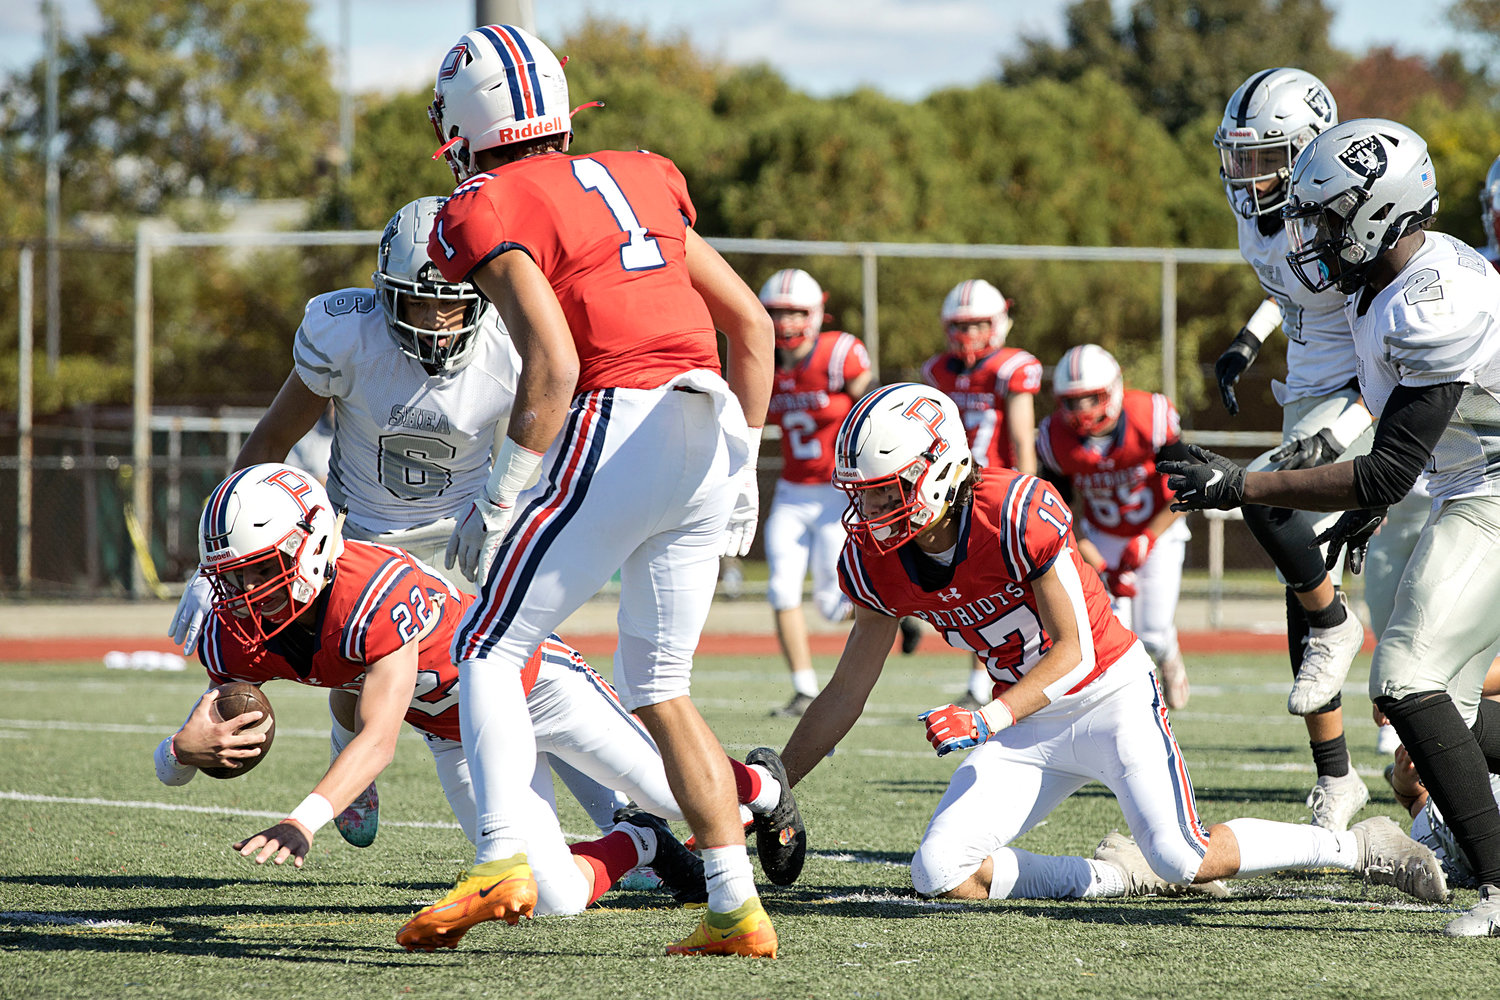 Dylan Brandariz dives through the Shea defense to advance the ball for the Patriots.